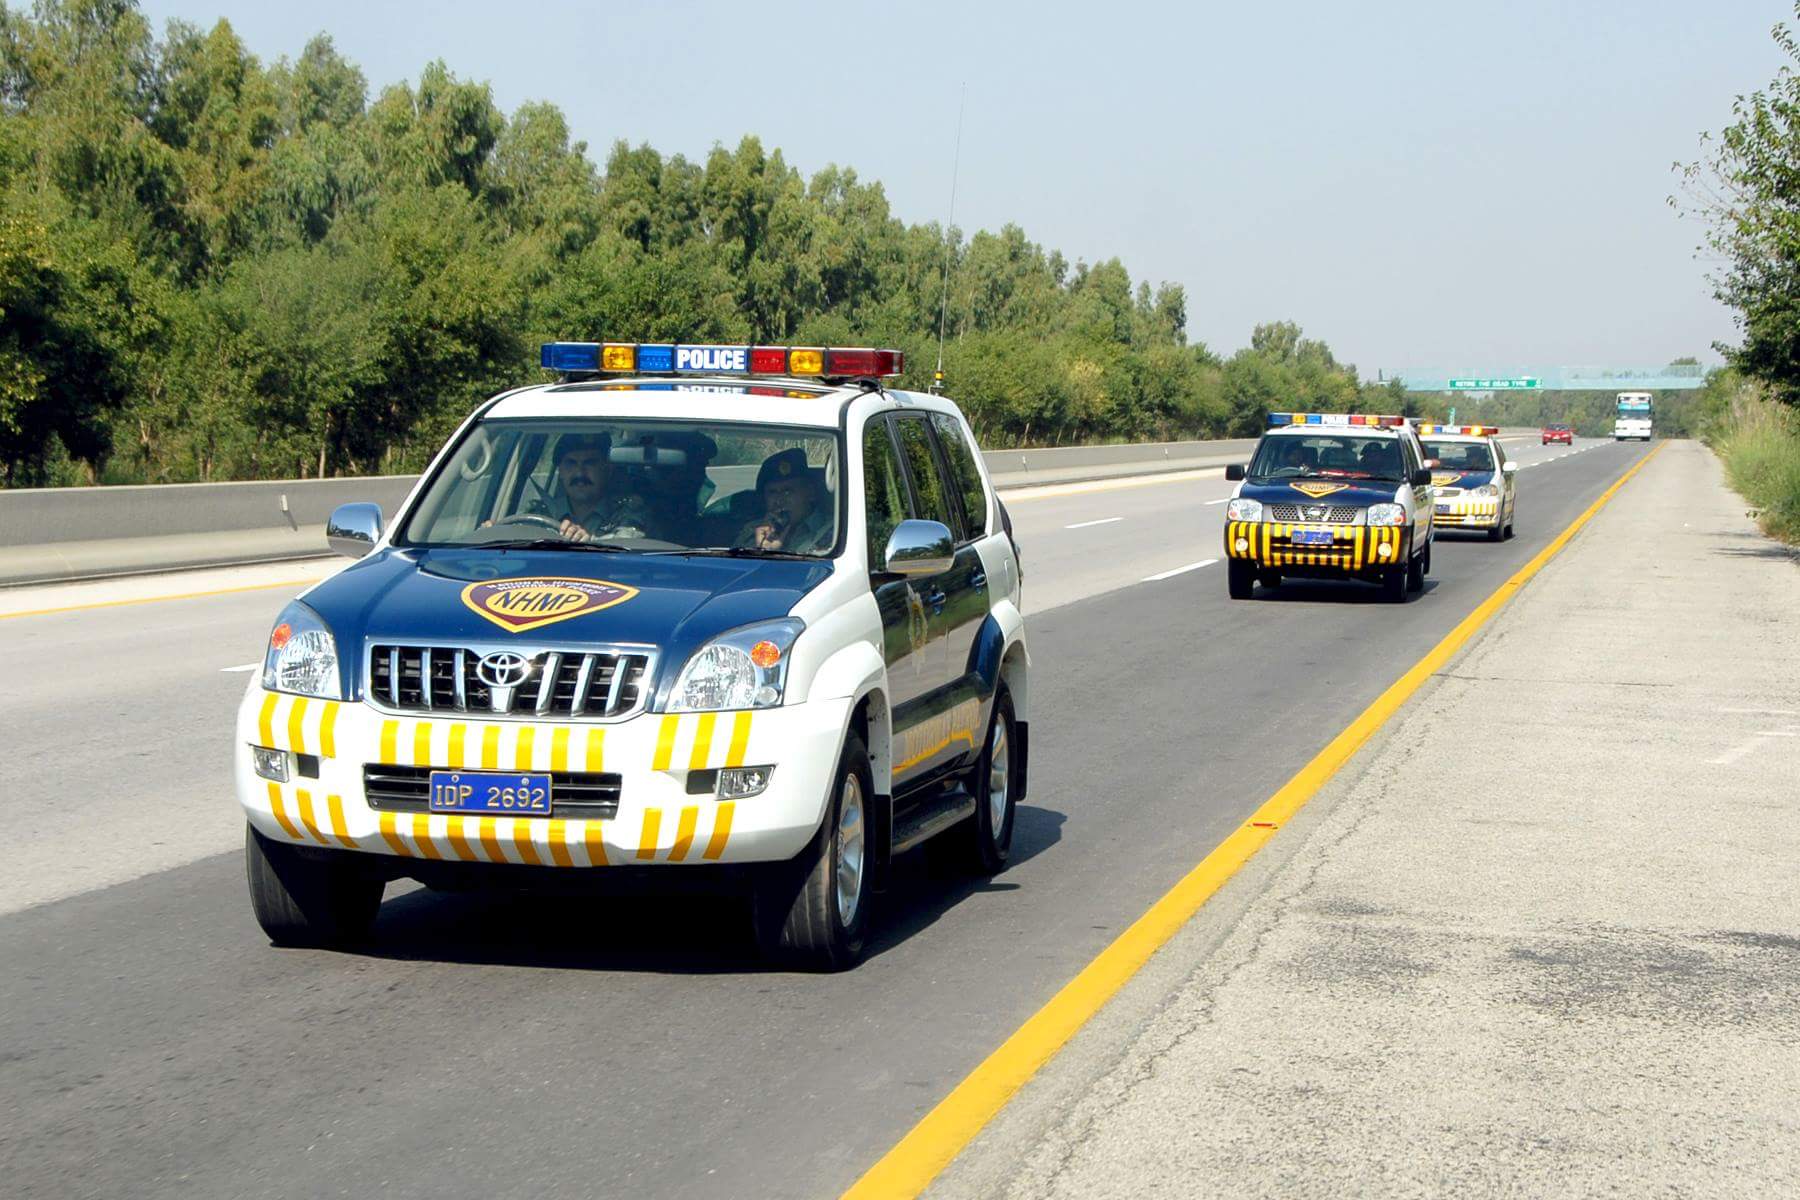 Amended fines ranging from min Rs. 750 to Rs. 10,000 put in place on Motorway